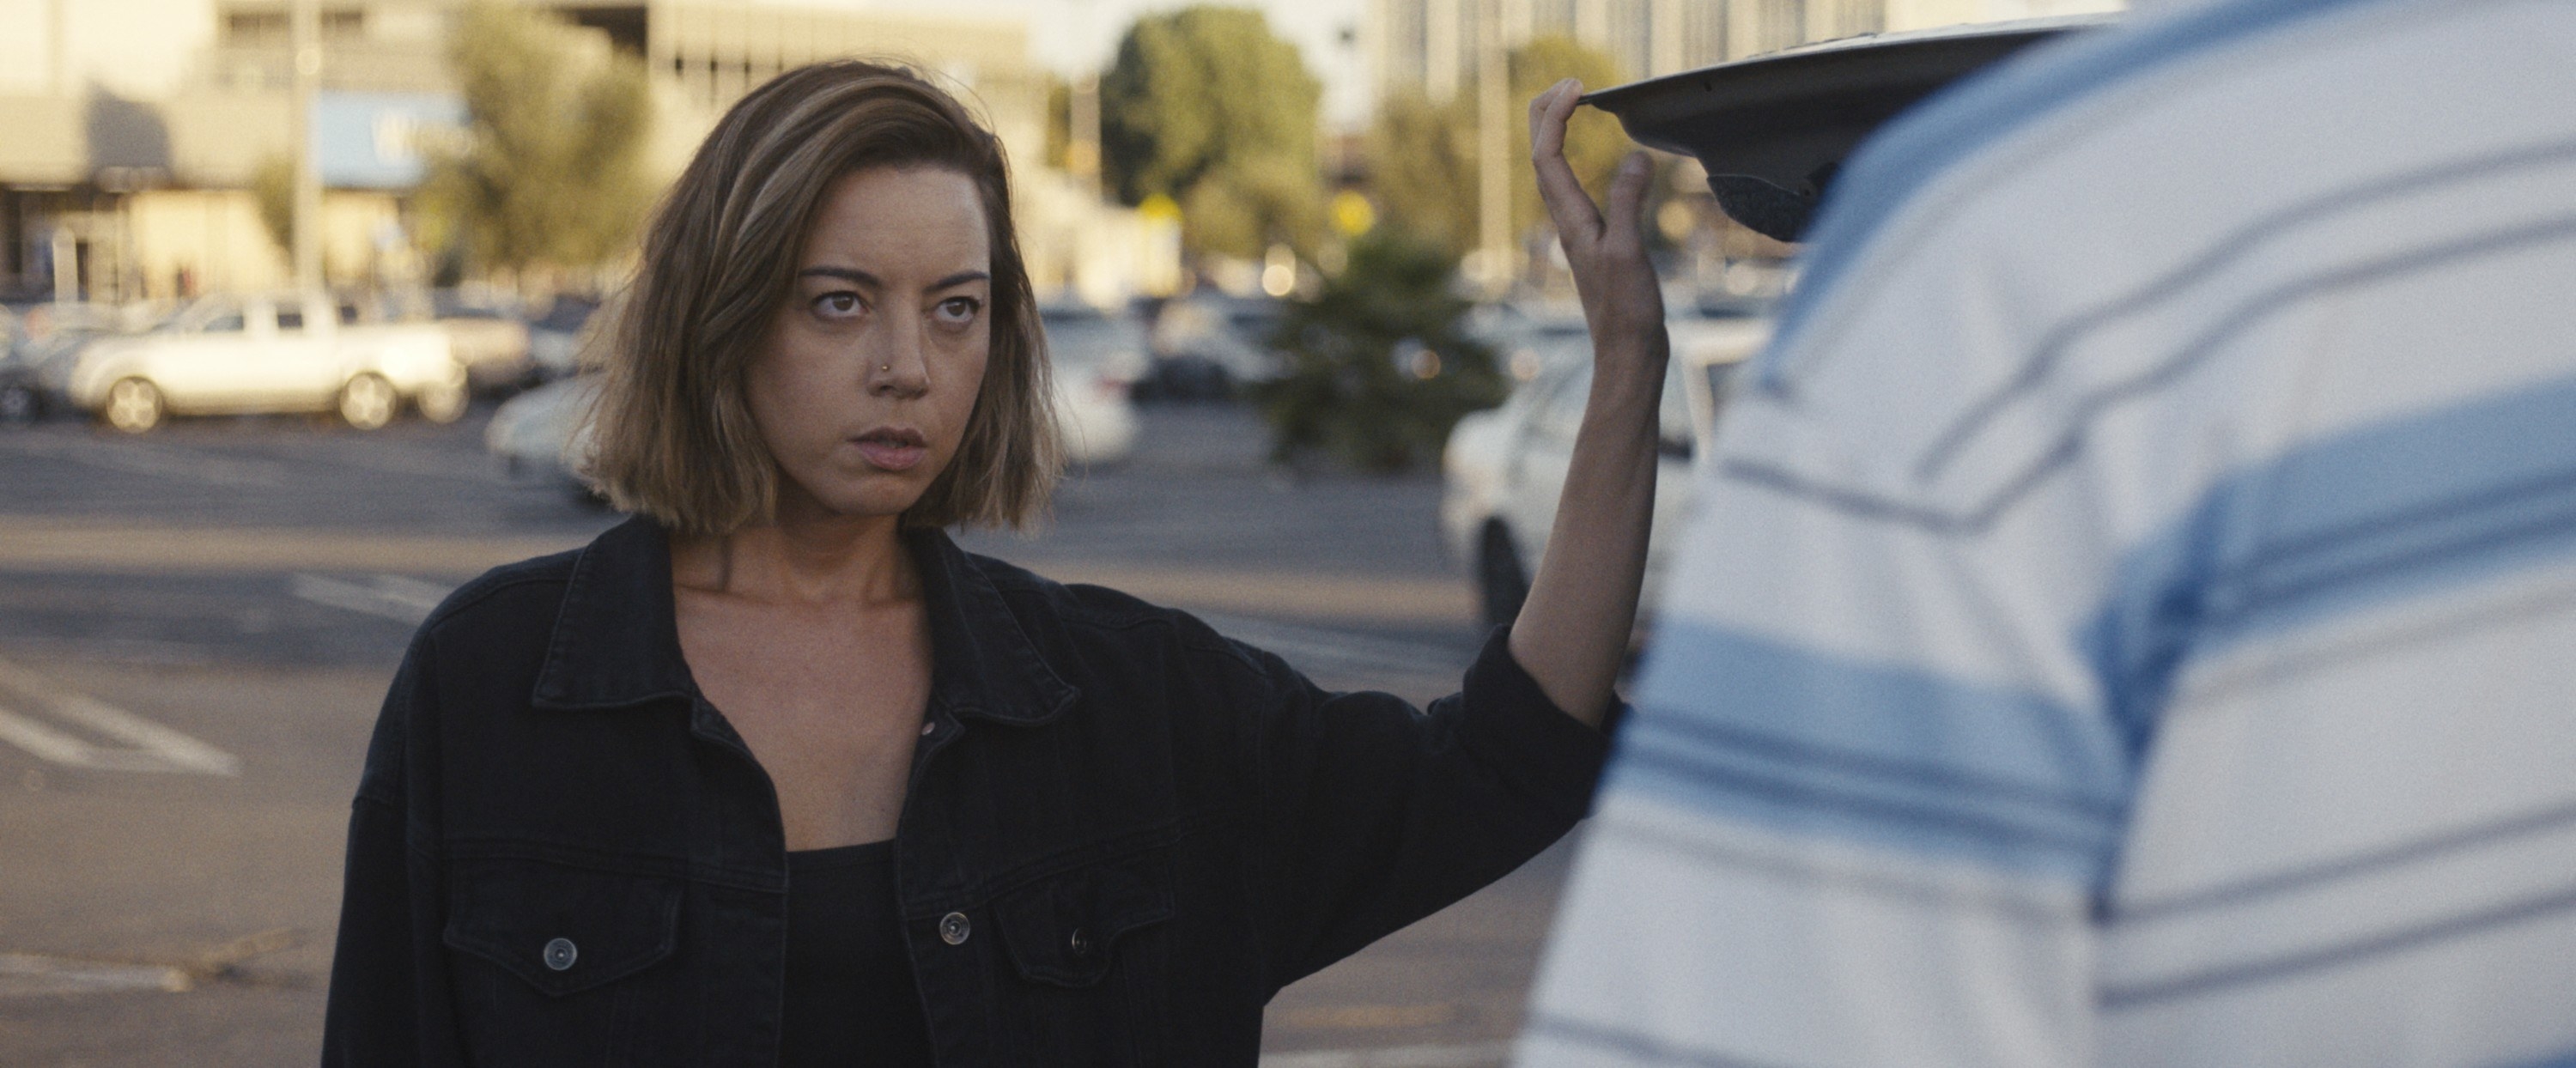 Aubrey Plaza stands in a parking lot